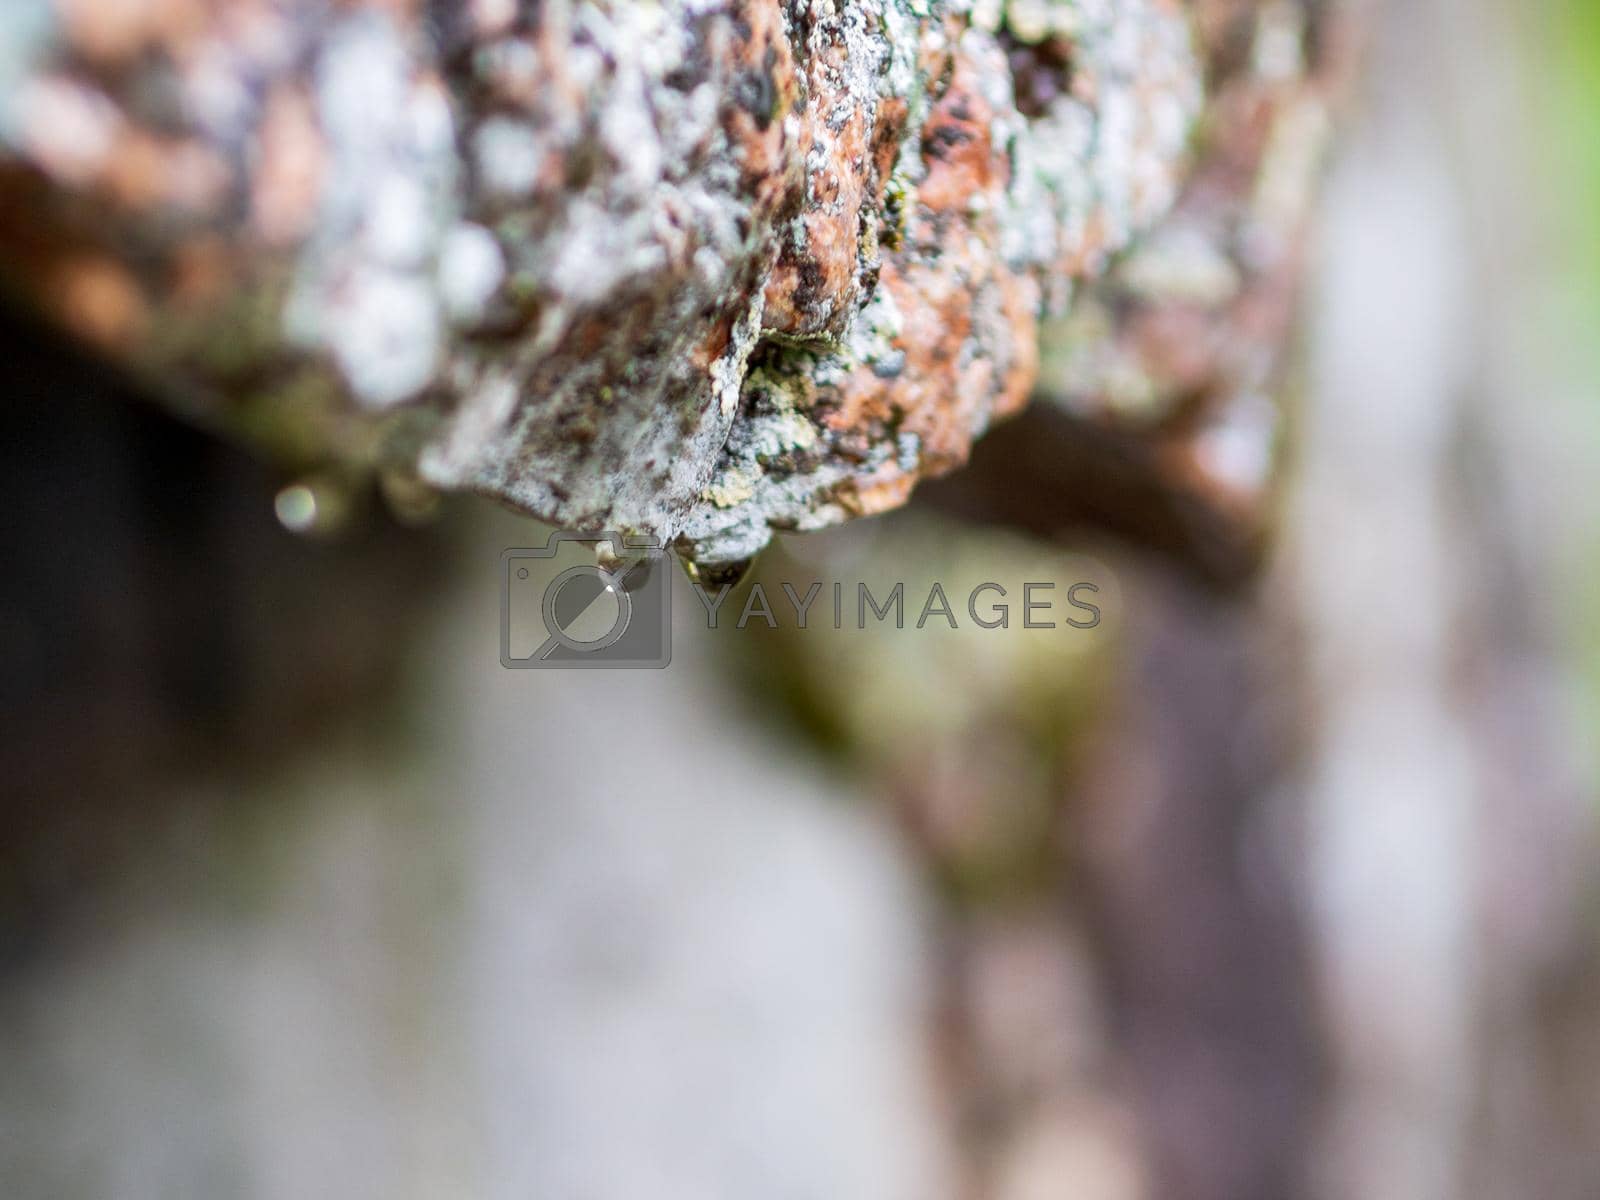 Royalty free image of Raindrops flow down granite rock. Close-up photo by Andre1ns